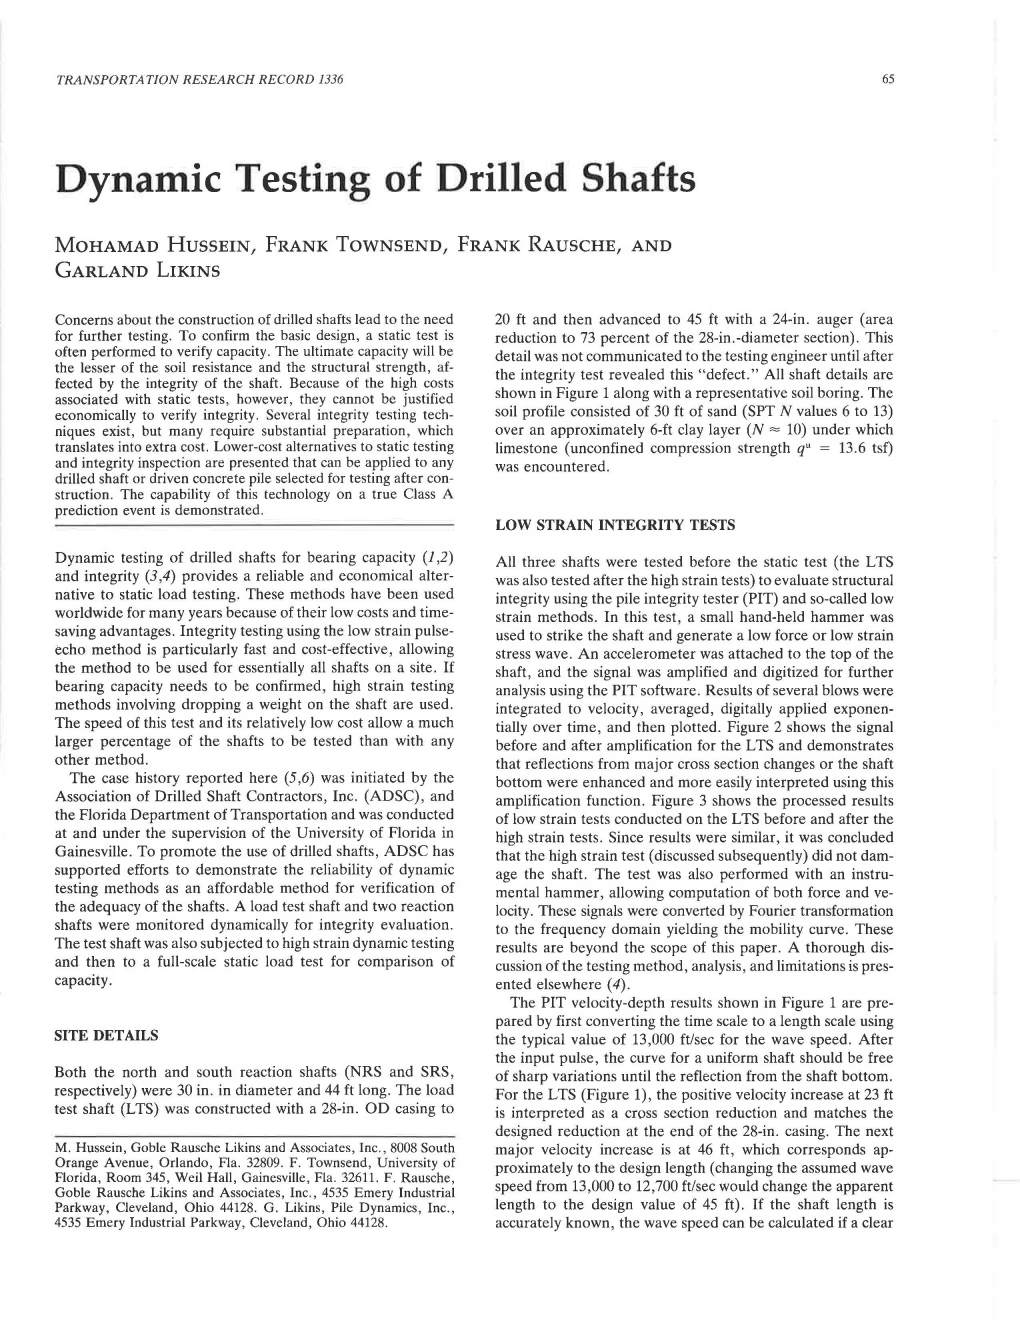 Dynamic Testing of Drilled Shafts